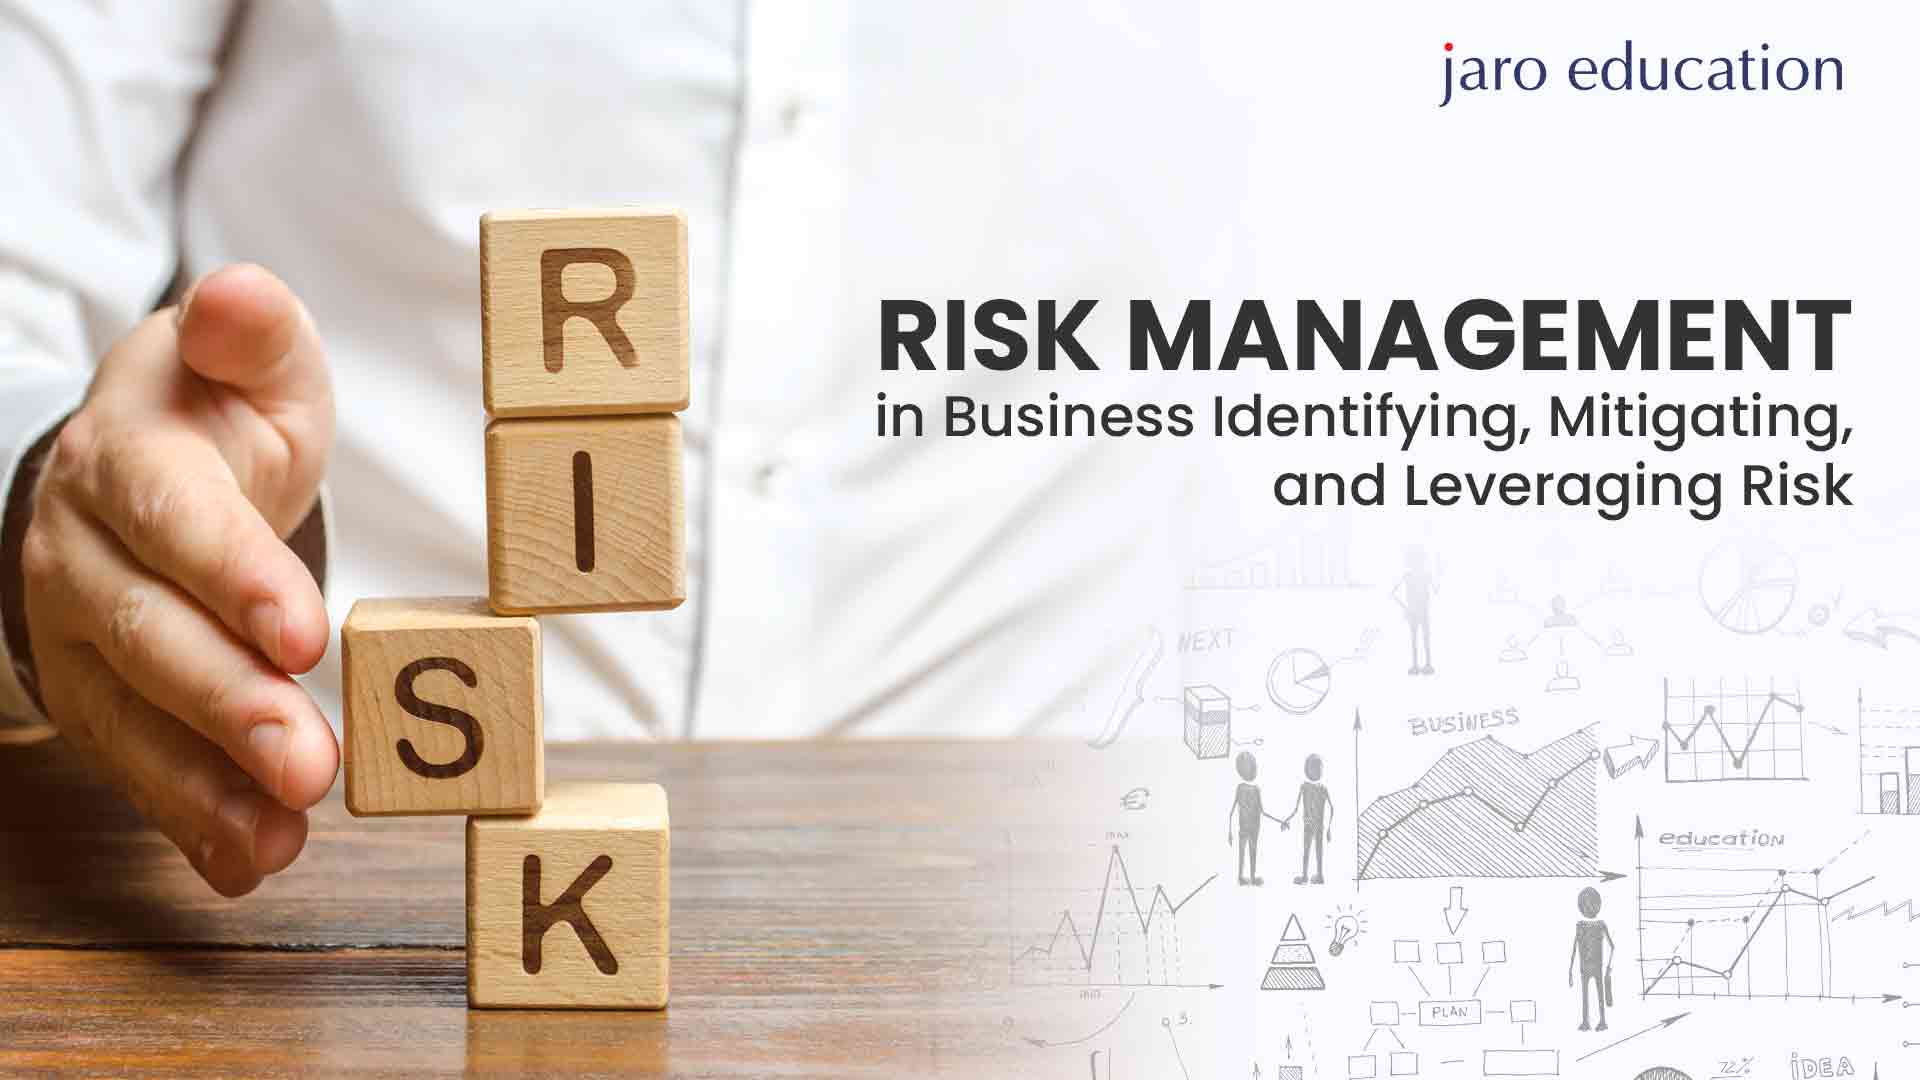 Risk Management in Business Identifying, Mitigating, and Leveraging Risk